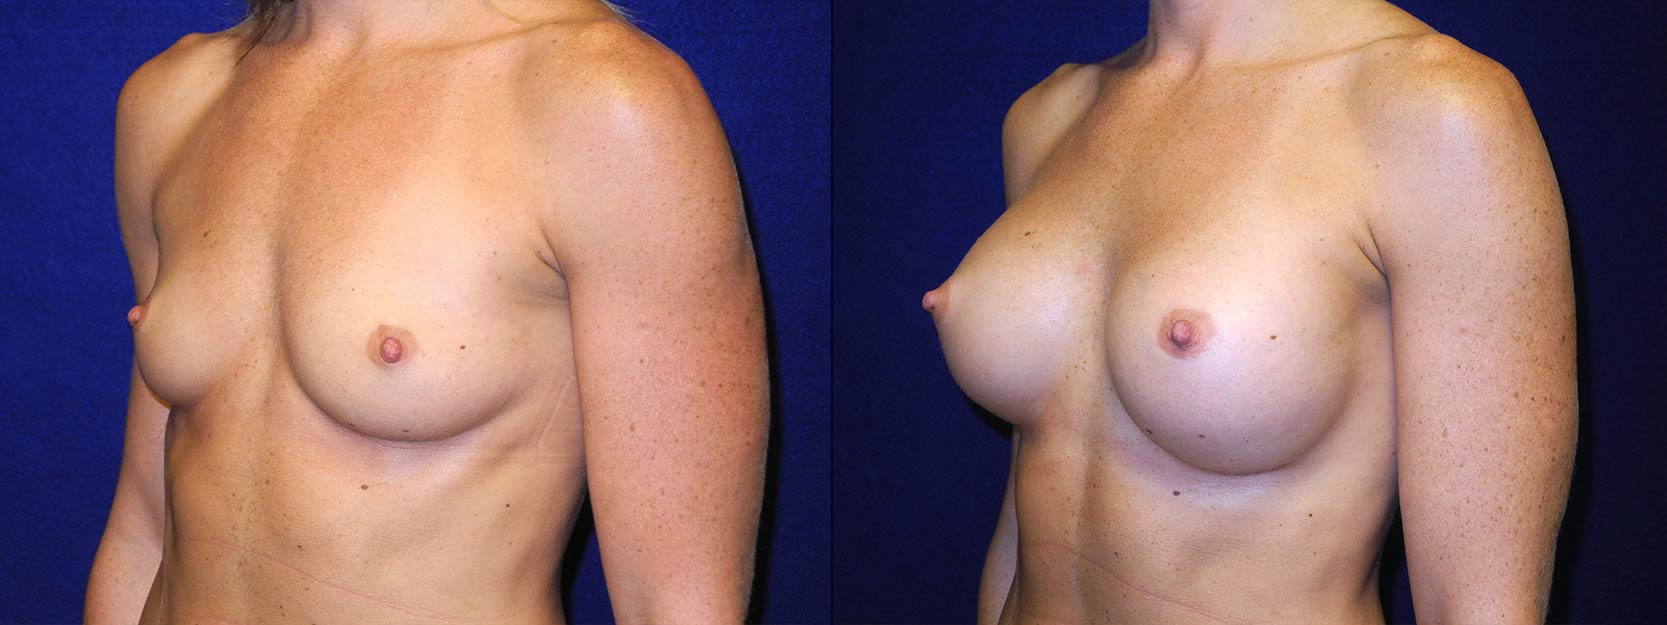 Left 3/4 View - Breast Augmentation - Silicone Implants